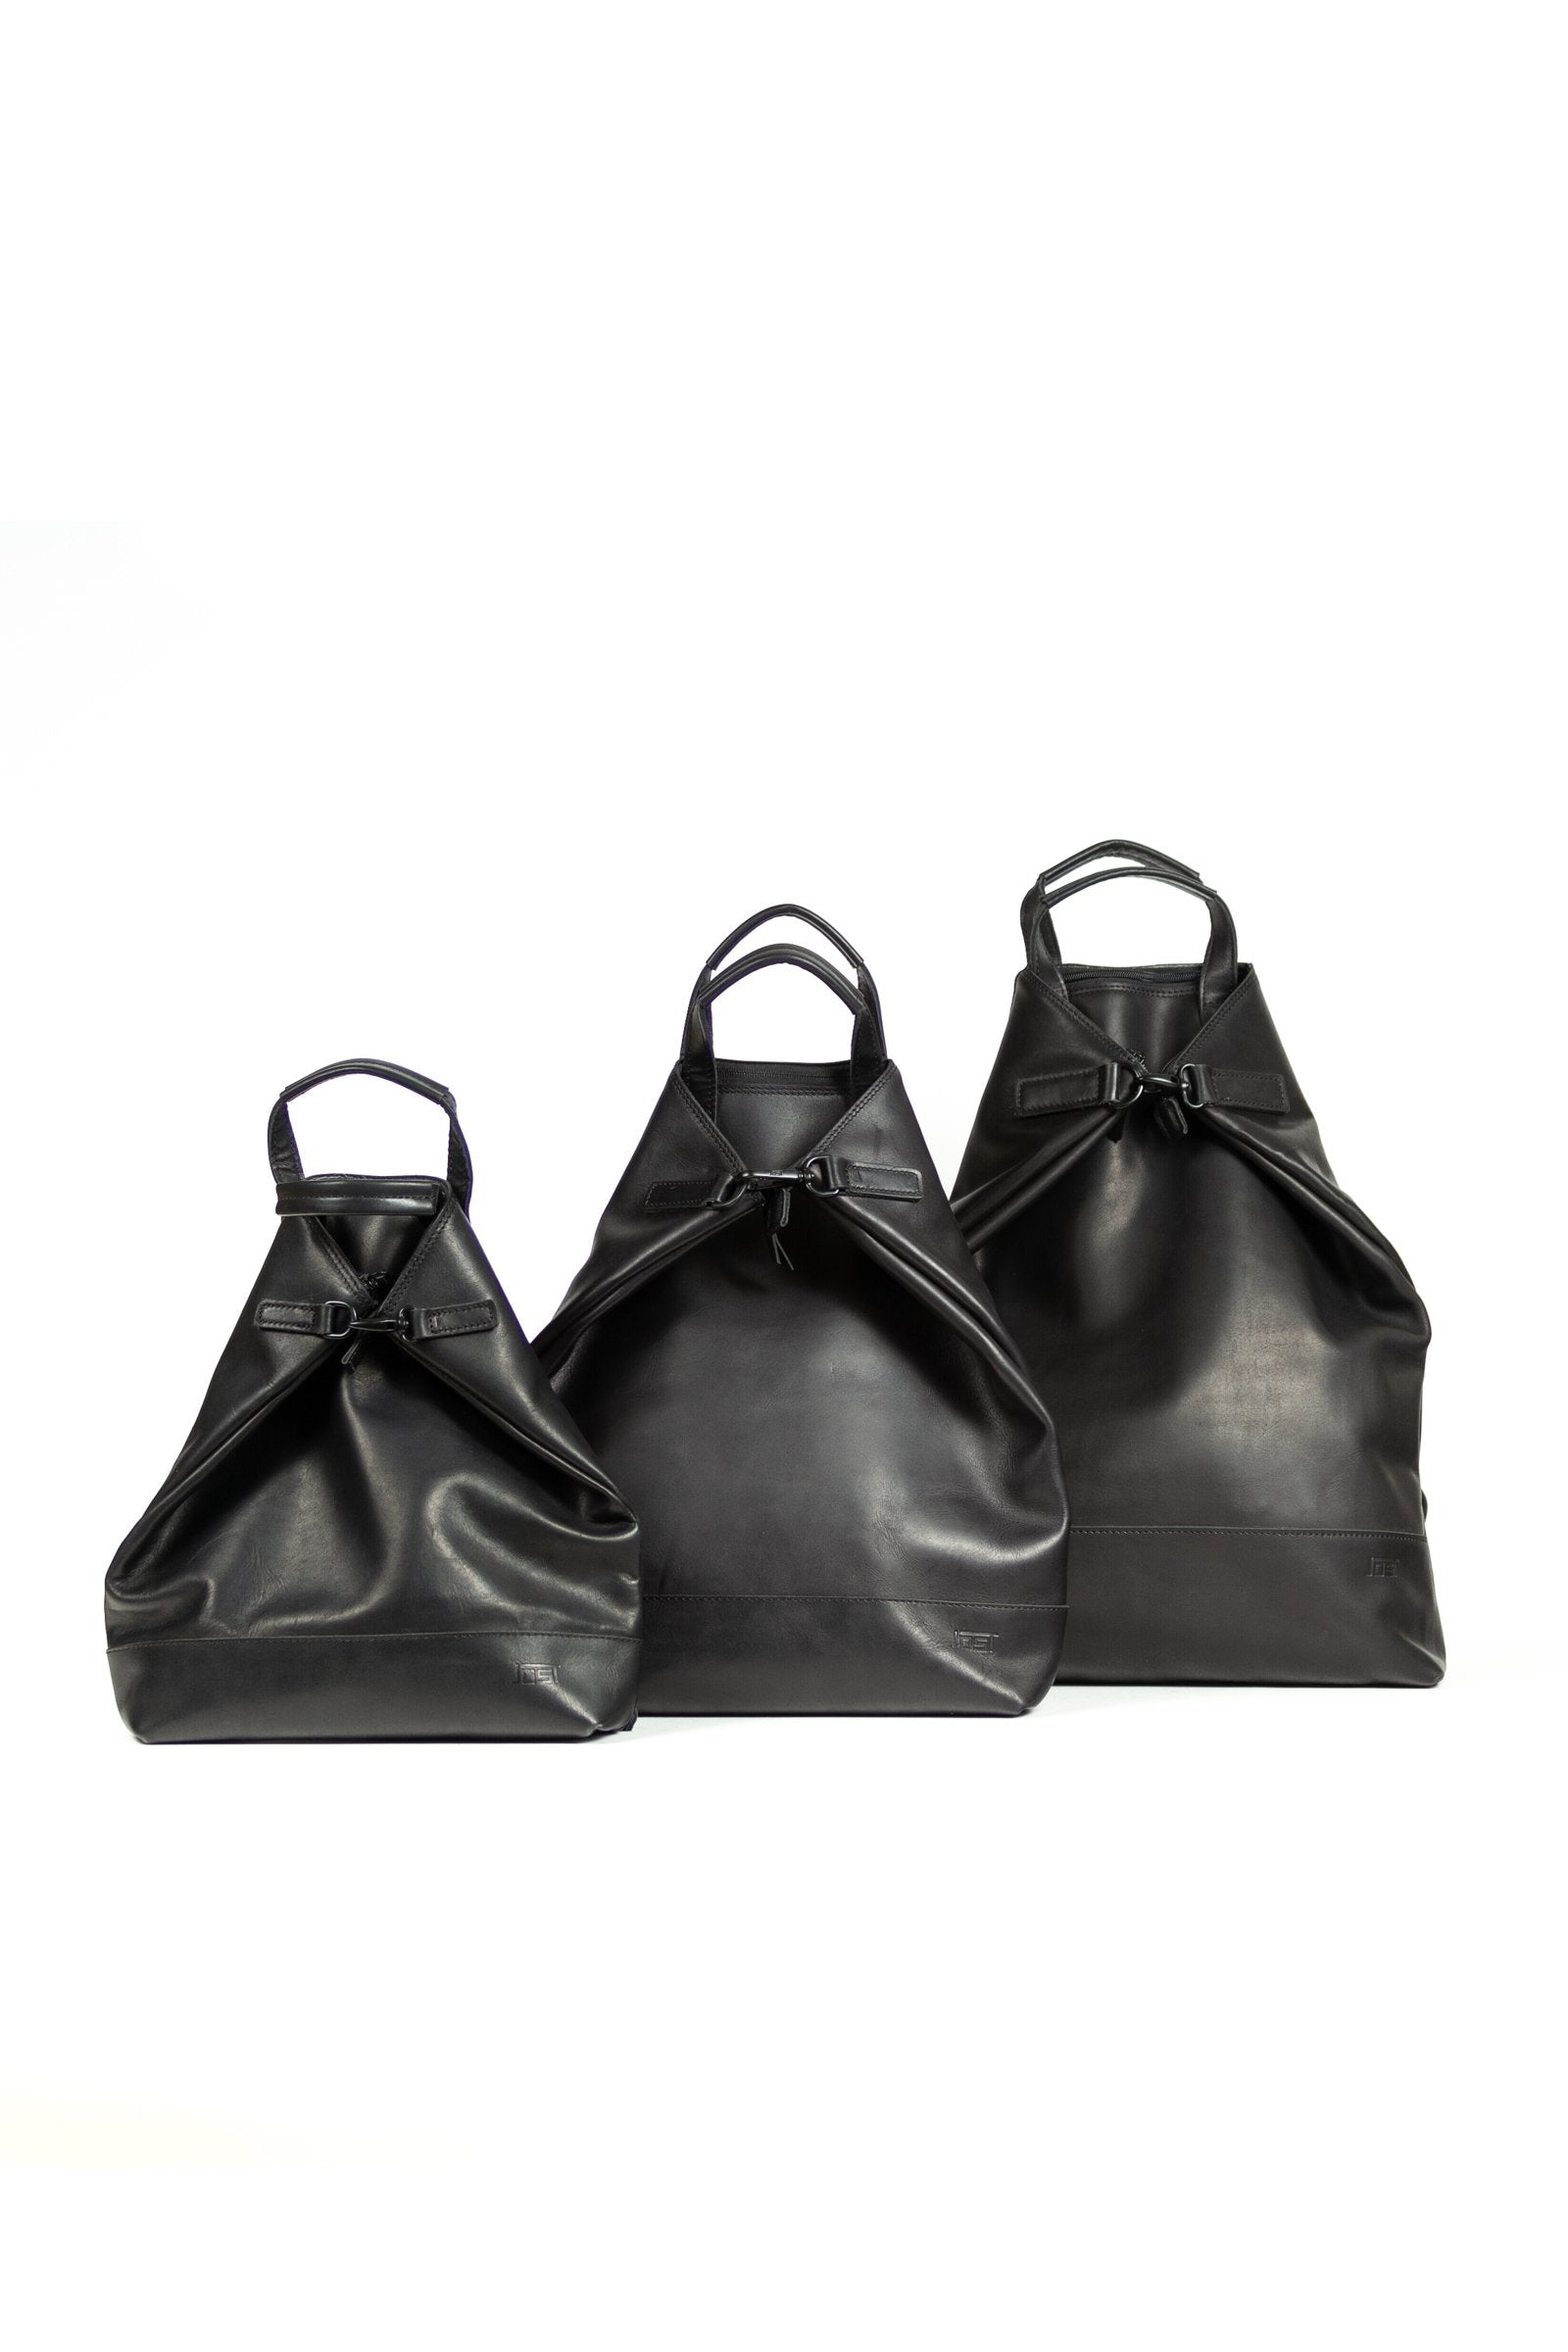 BEON.COM.AU The Jost Futura X-Change Large is a leather bag made in Europe from premium European leathers and fabrics. 3 in 1 bag that can be worn as a backpack, shoulder bag and handbag Made in smooth cowhide with pull-up effect Laptop compartment fits up to 26cm x 20cm x 2cm Closes with zipper Padded lapto... Jost at BEON.COM.AU